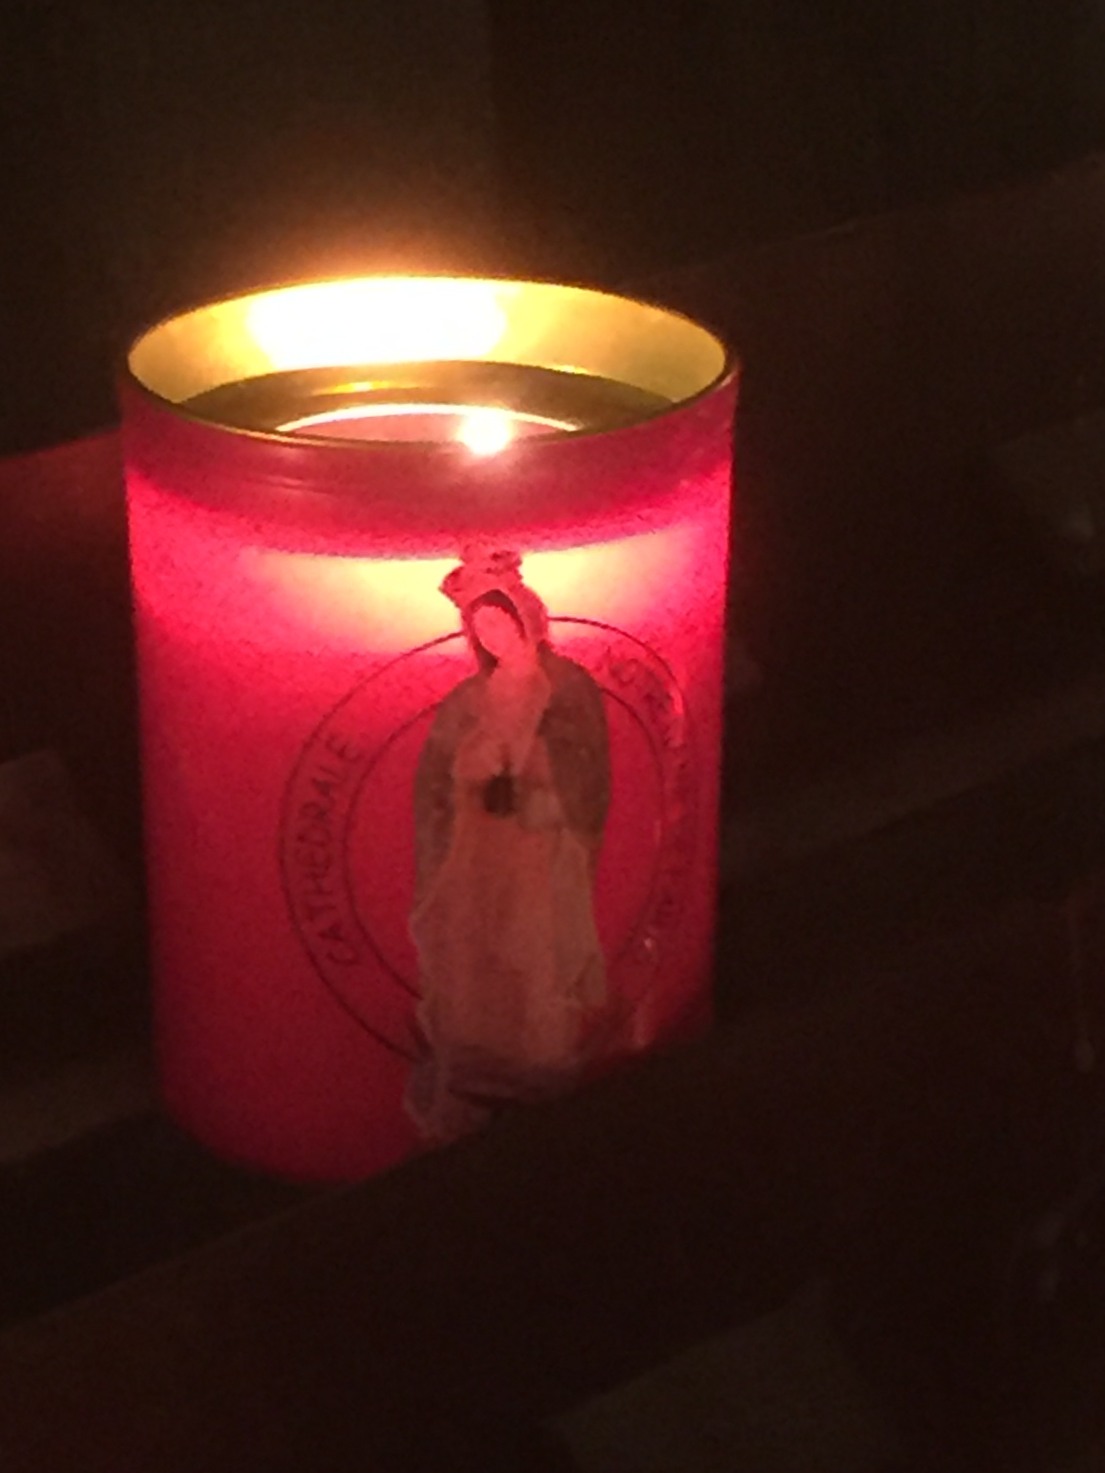 Paris: Candle for Diddley in Notre Dame.